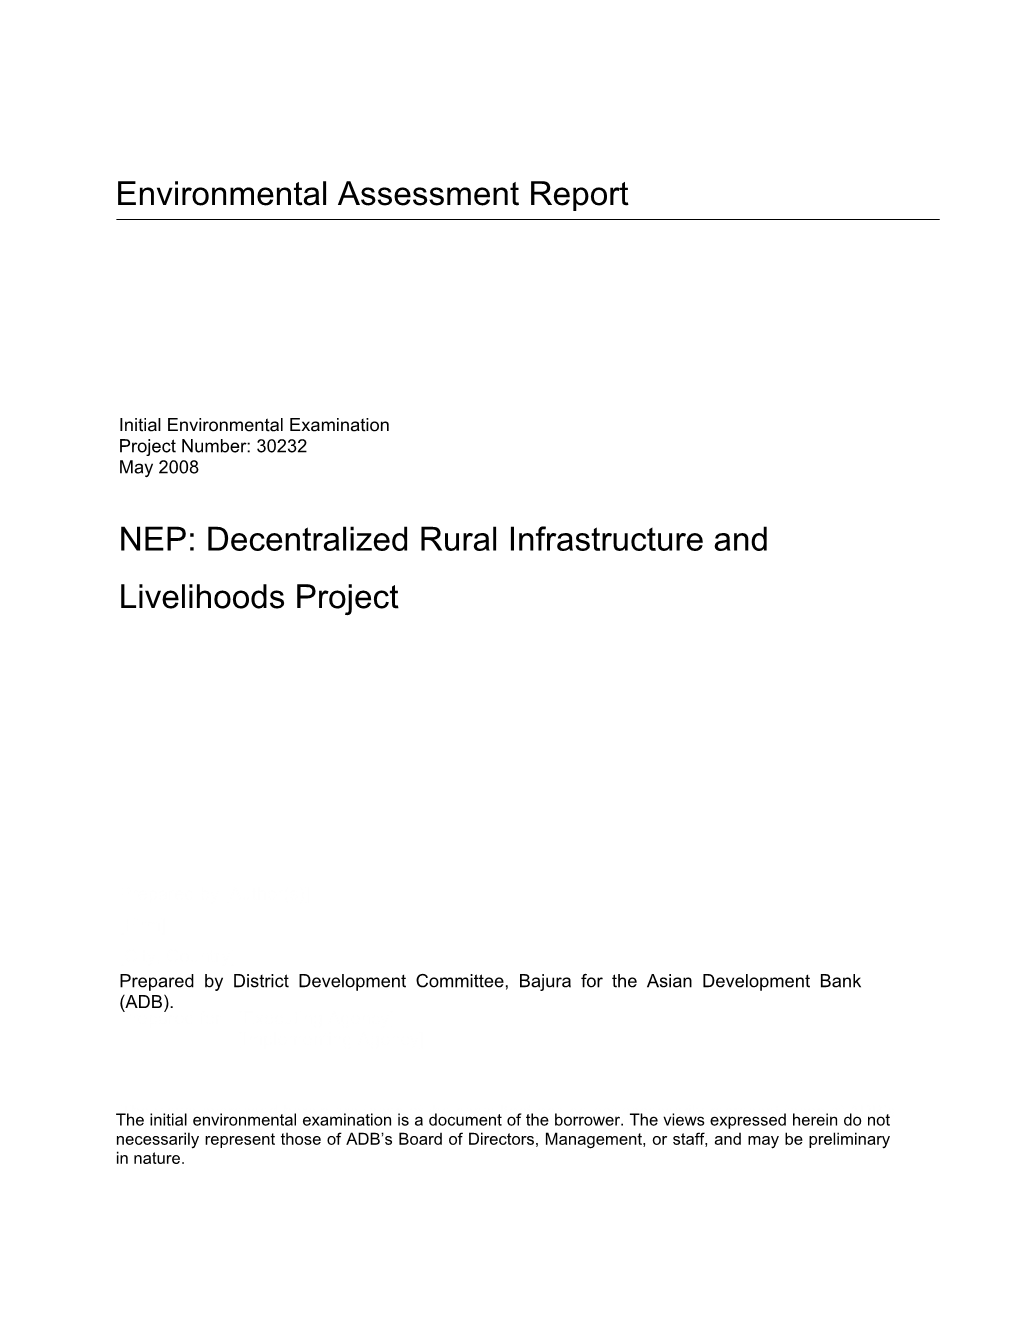 NEP: Decentralized Rural Infrastructure and Livelihoods Project